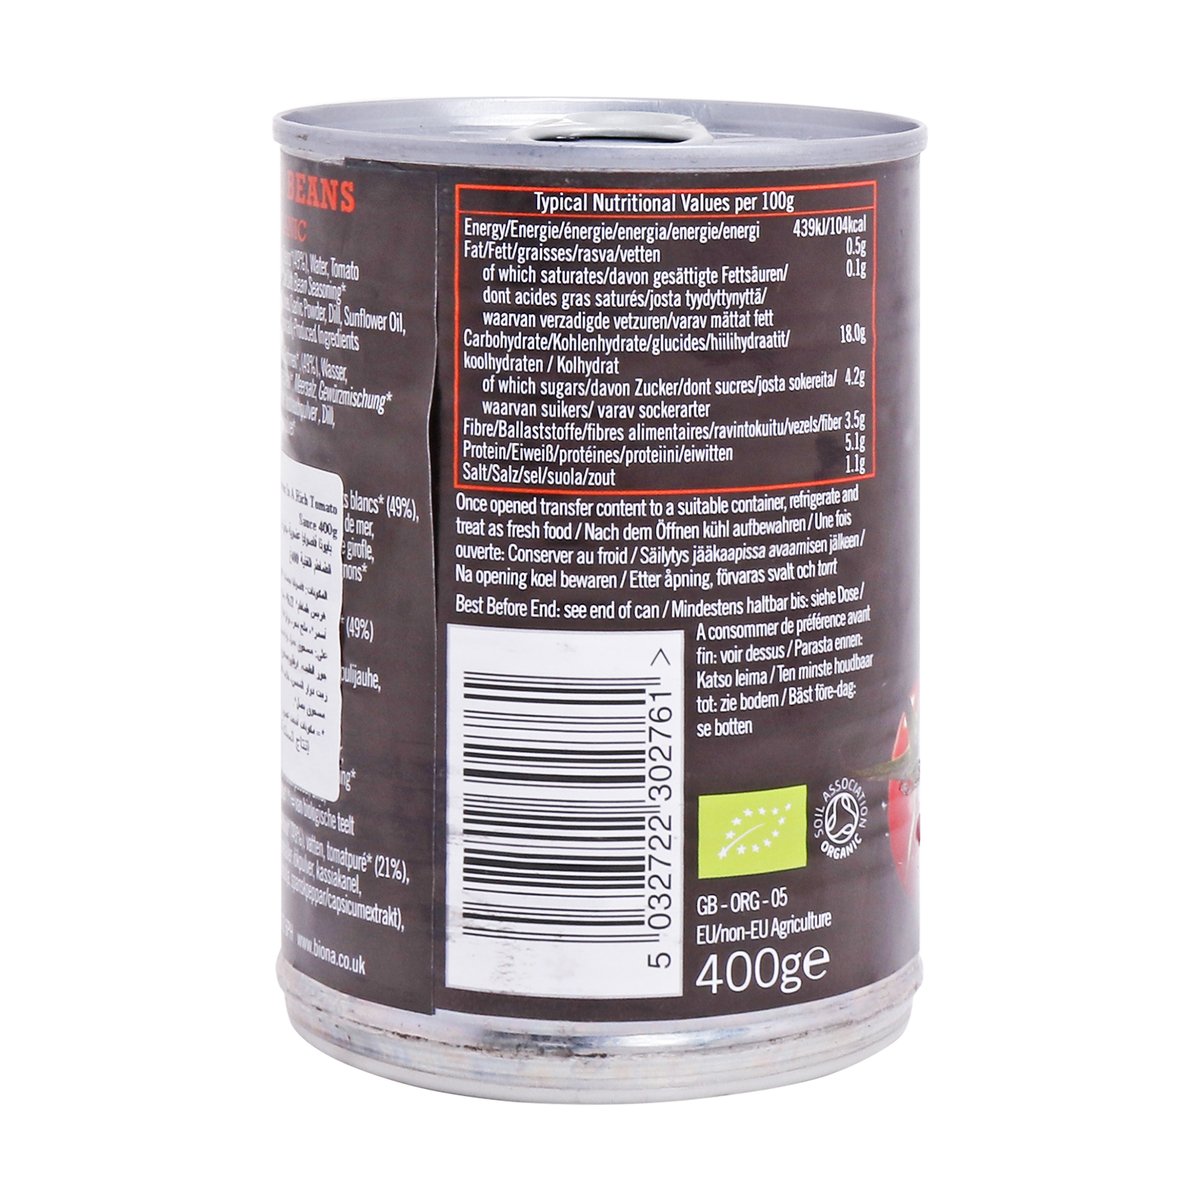 Biona Organic Baked Beans in a Rich Tomato Sauce 400 g